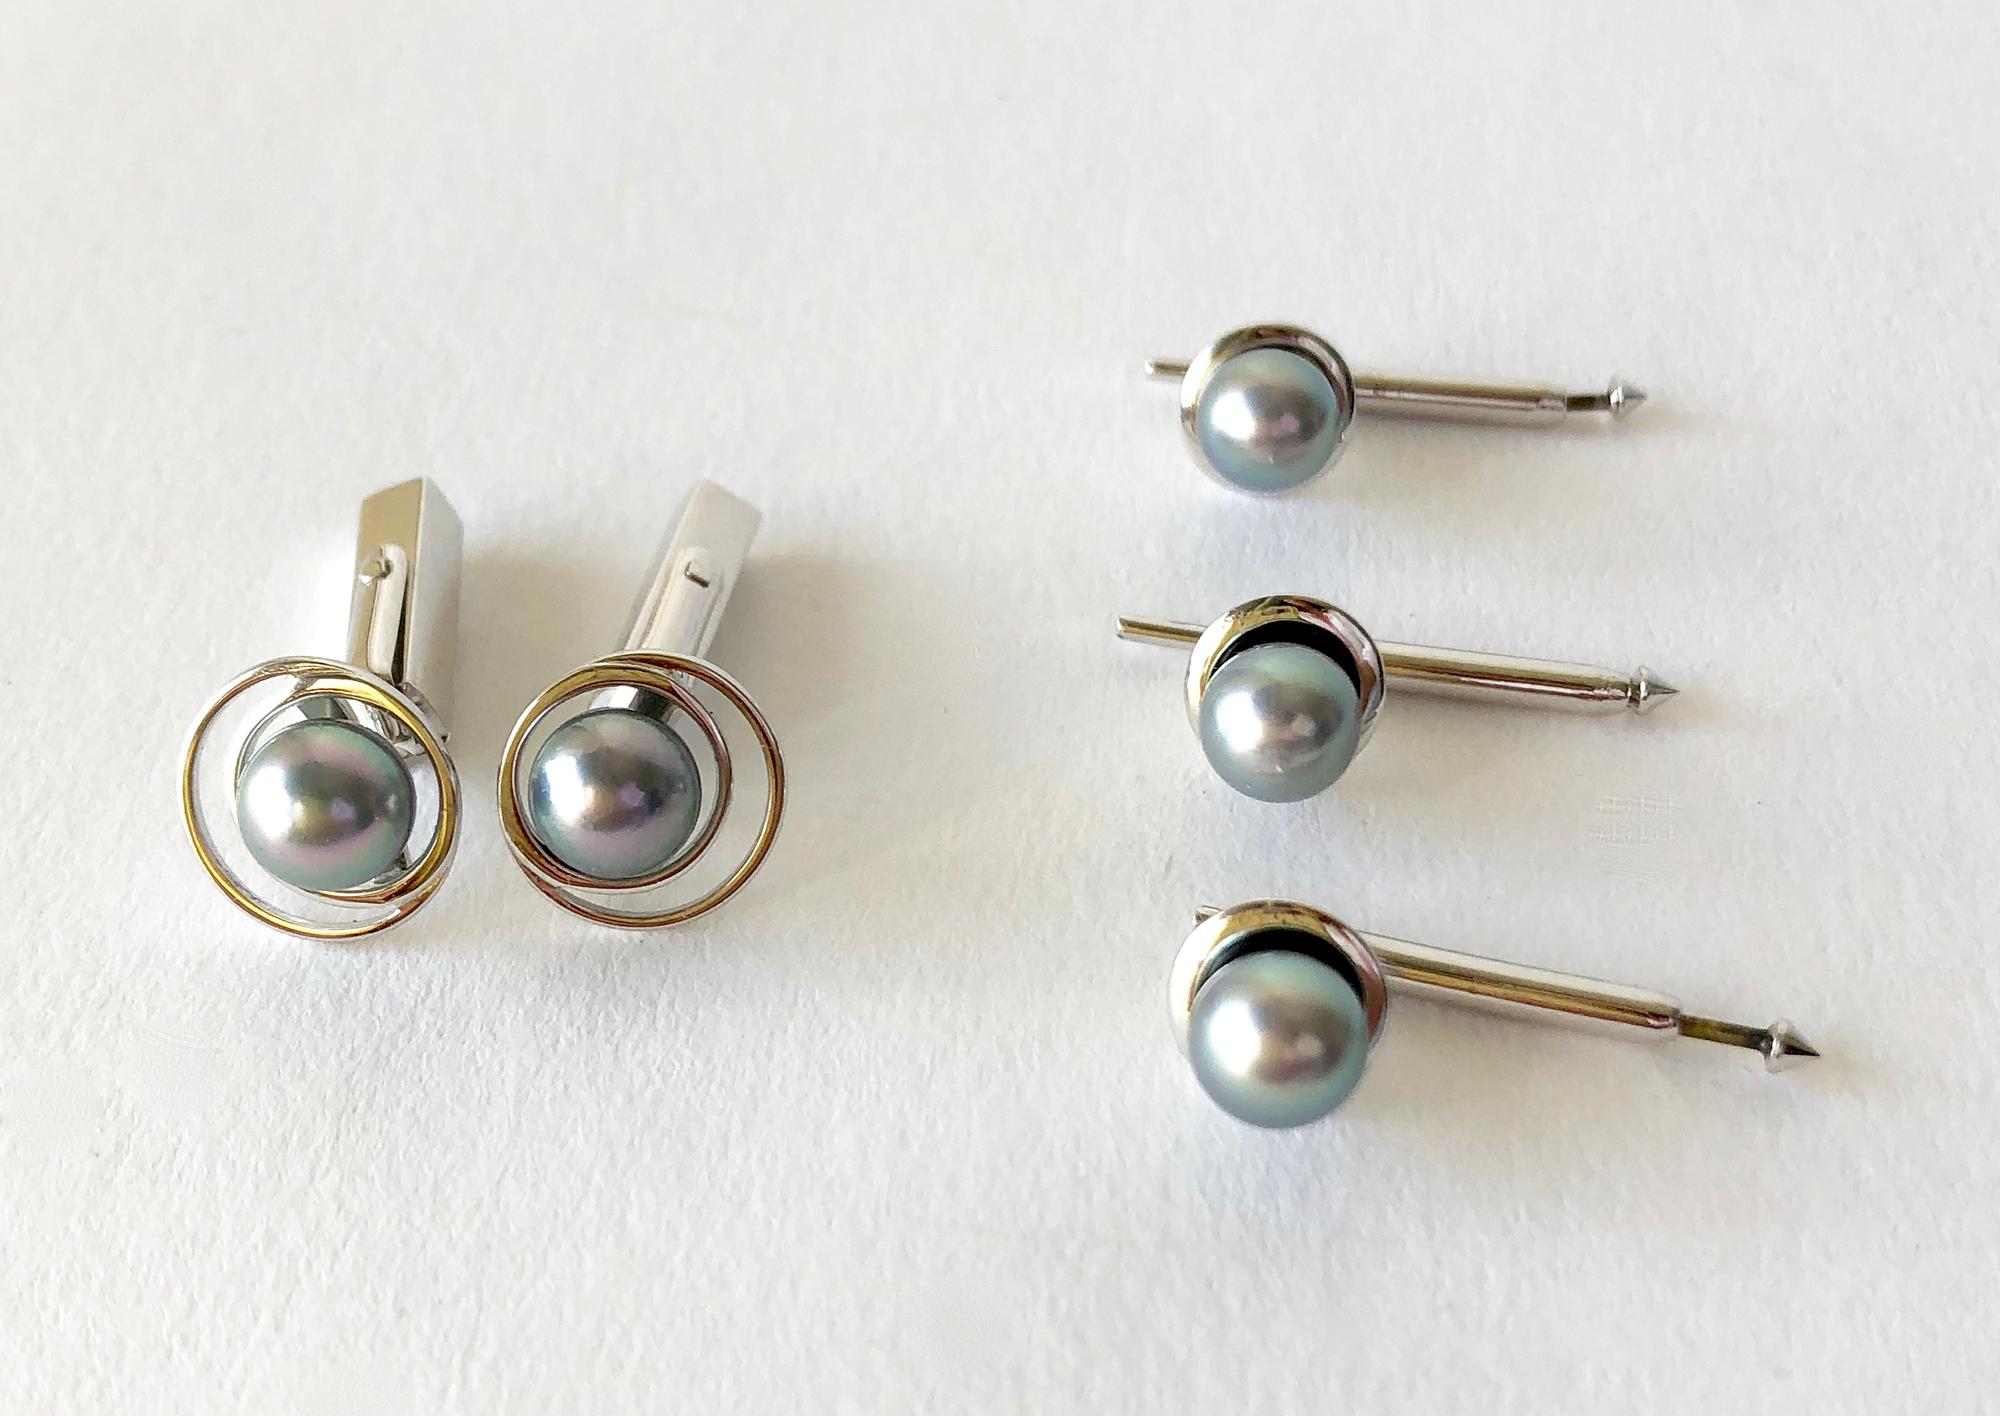 Vintage 14k white gold and Tahitian pearl cufflinks and stud set, circa 1960's.  Signed 14K.  10.9 grams.